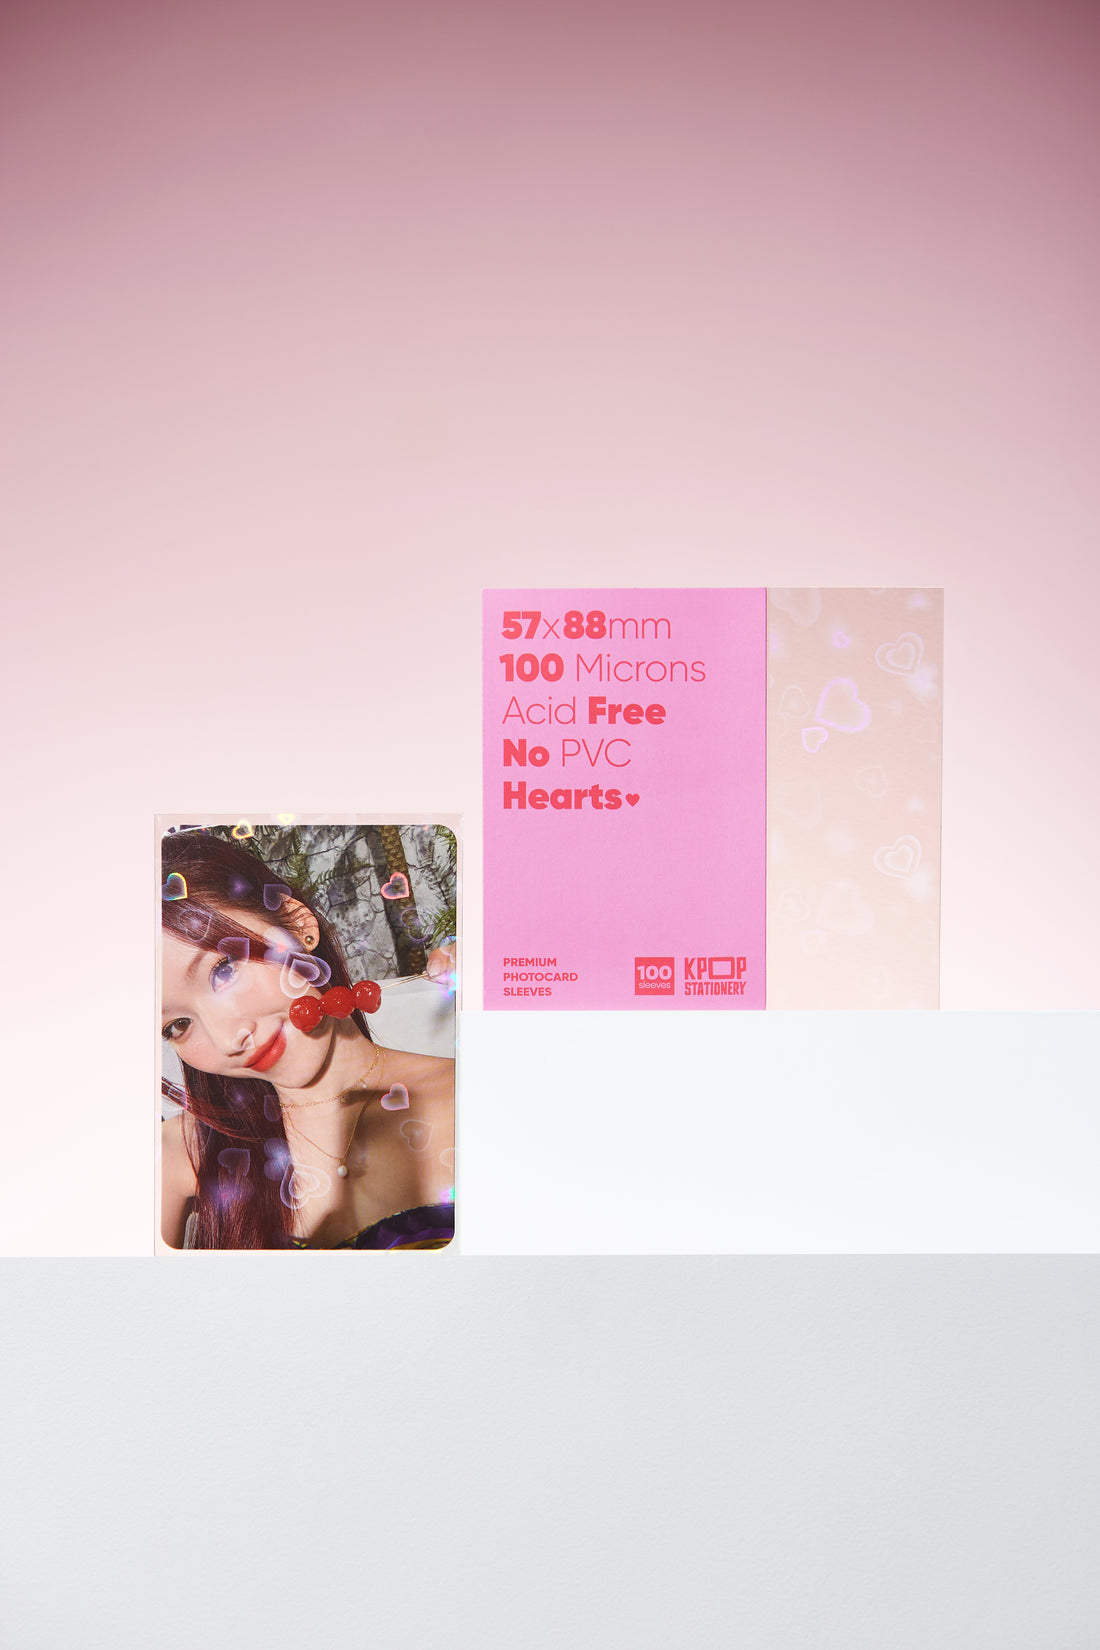 kpop holographic photocard sleeves for 57 x 88, heart